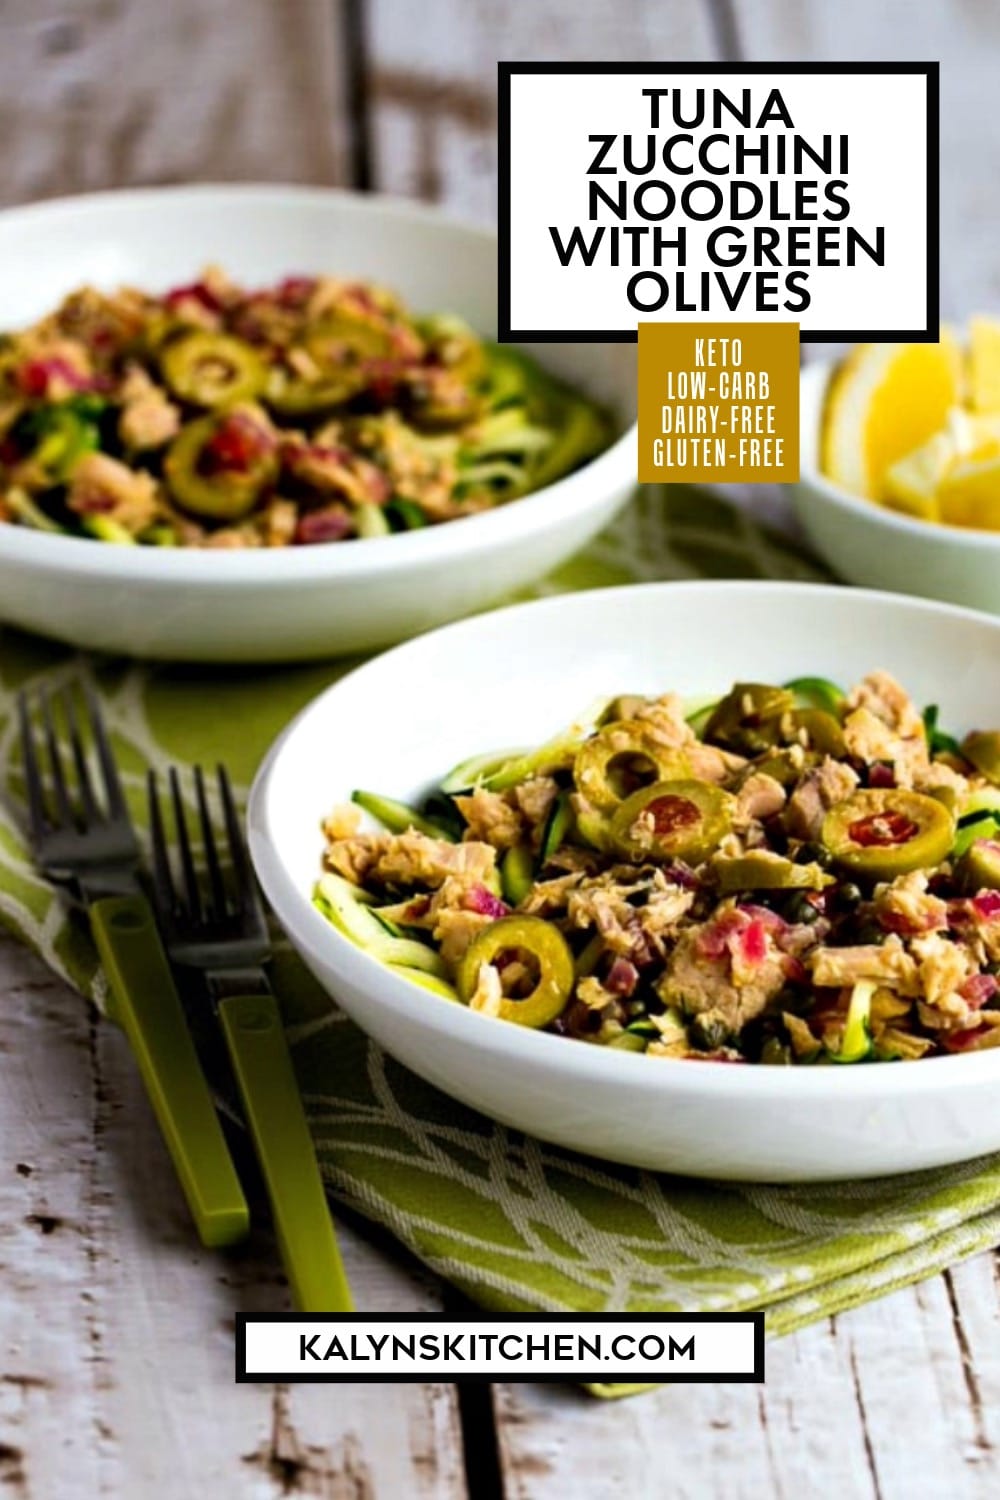 Pinterest image of Tuna Zucchini Noodles with Green Olives